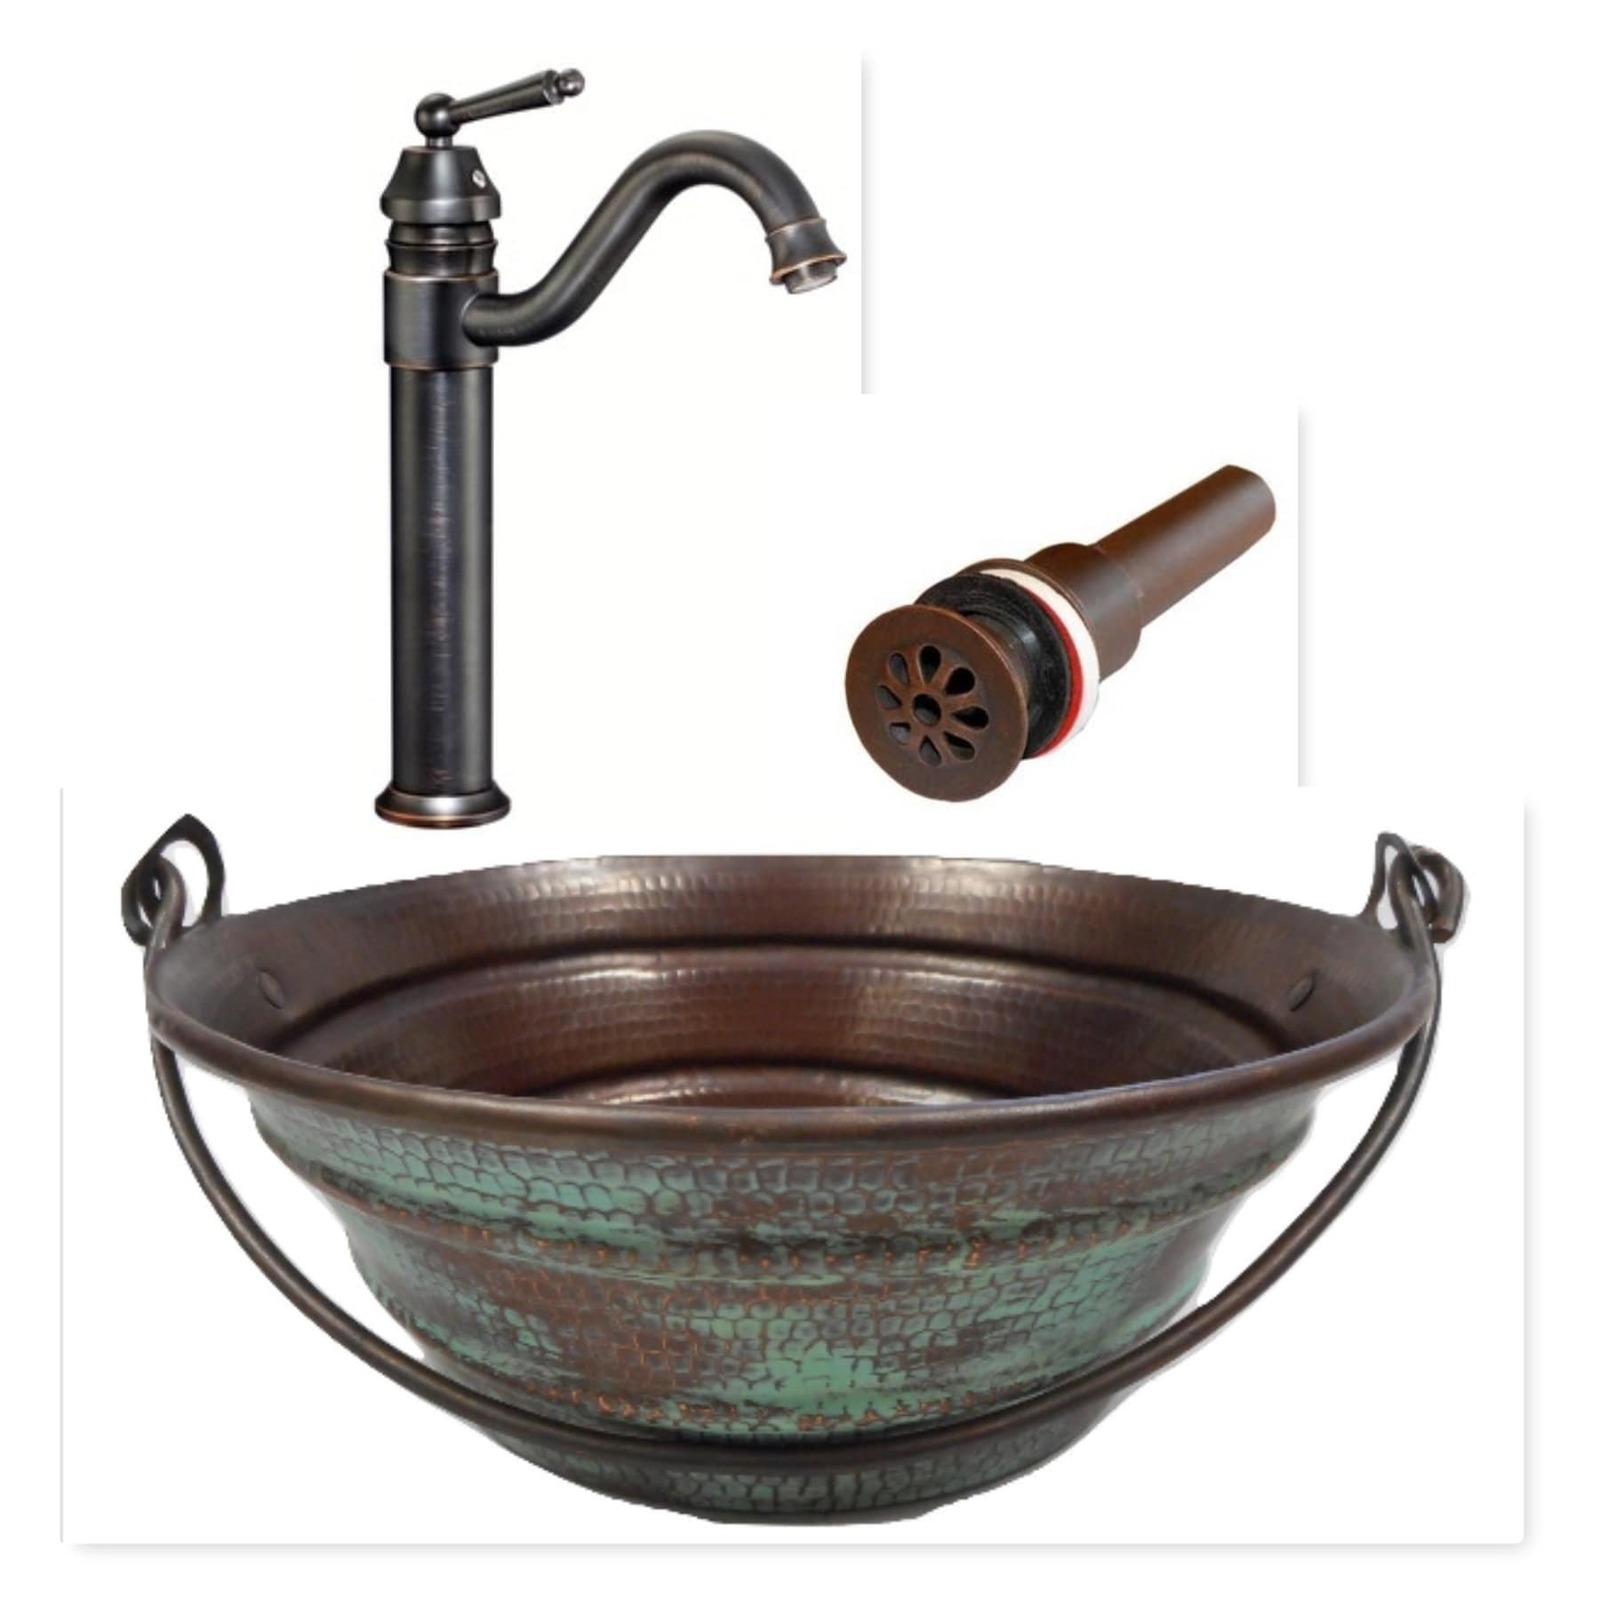 Primary image for 15" Round Copper Bucket Vessel Sink with GREEN Patina, Faucet & Drain Included